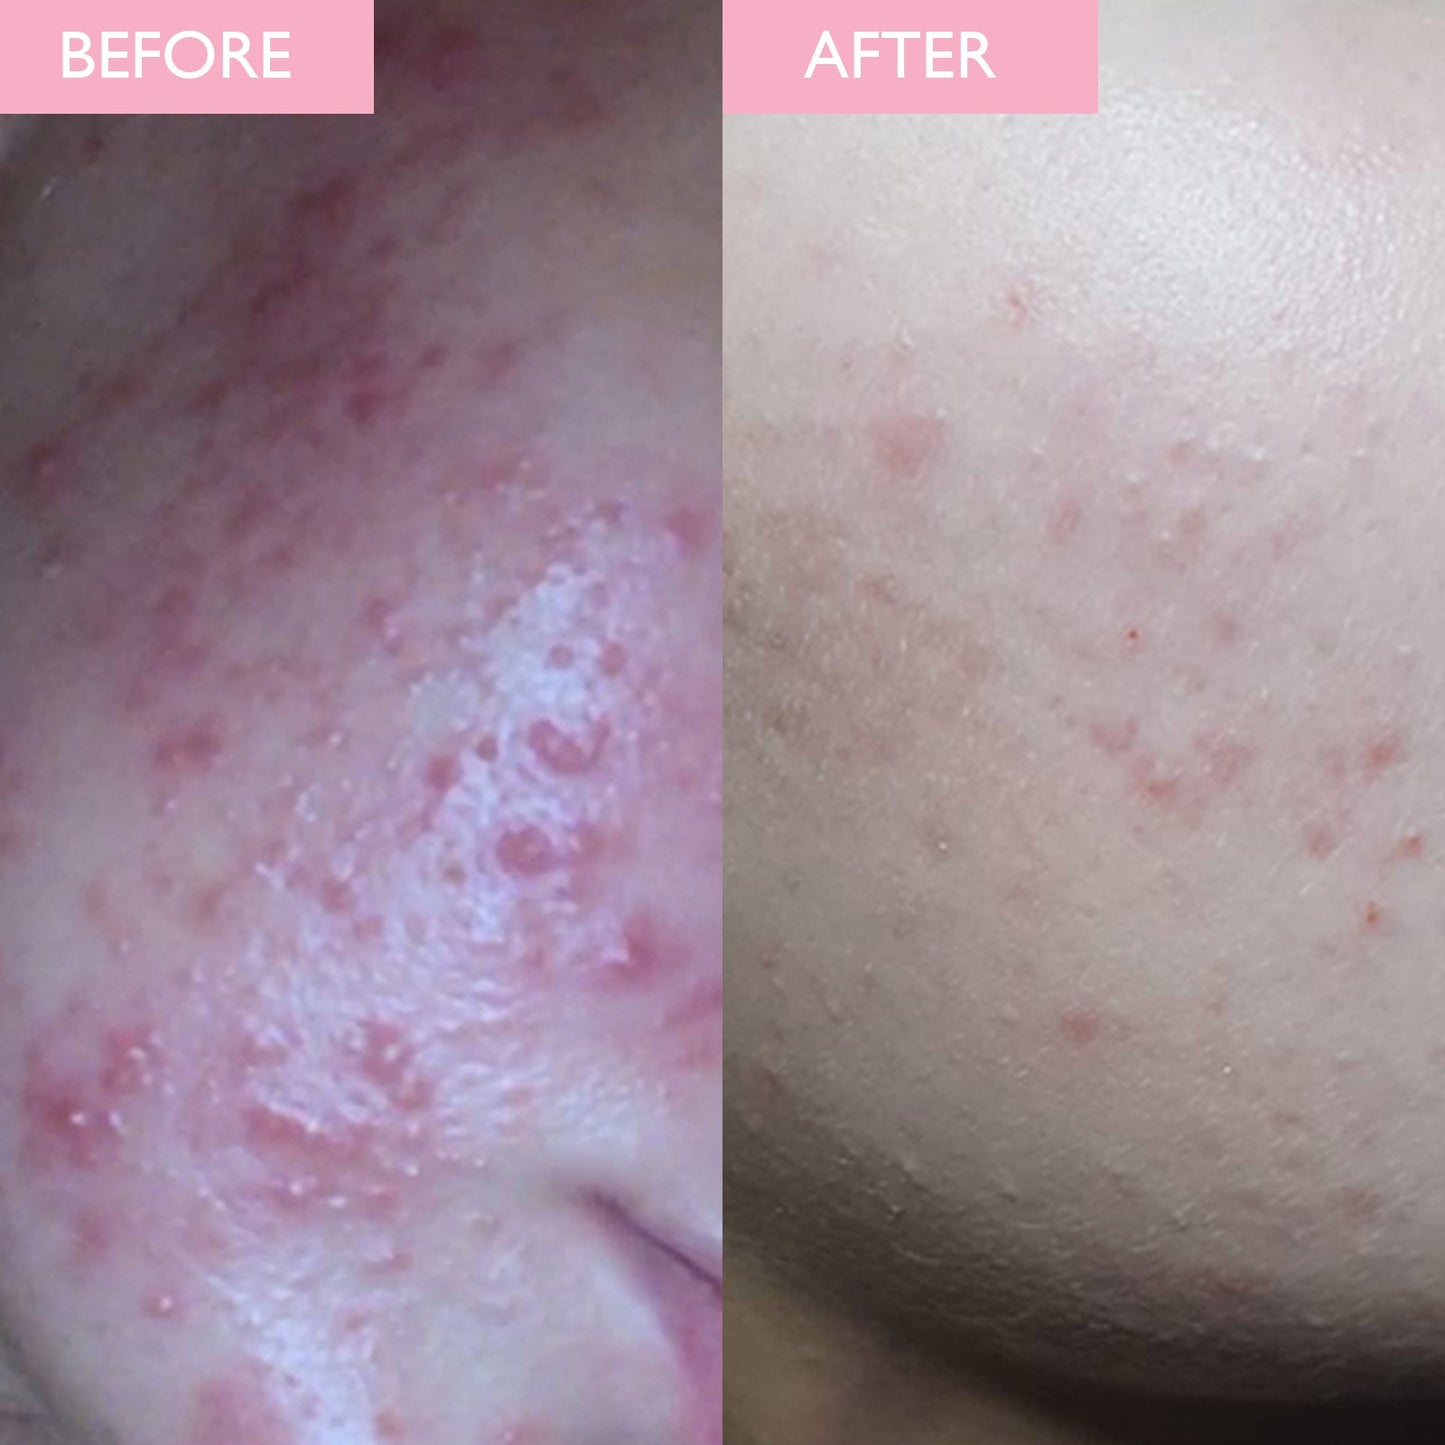 Before and after image of inflammed acne.  Improvement shown after using the sensitive skin items from Skinician.